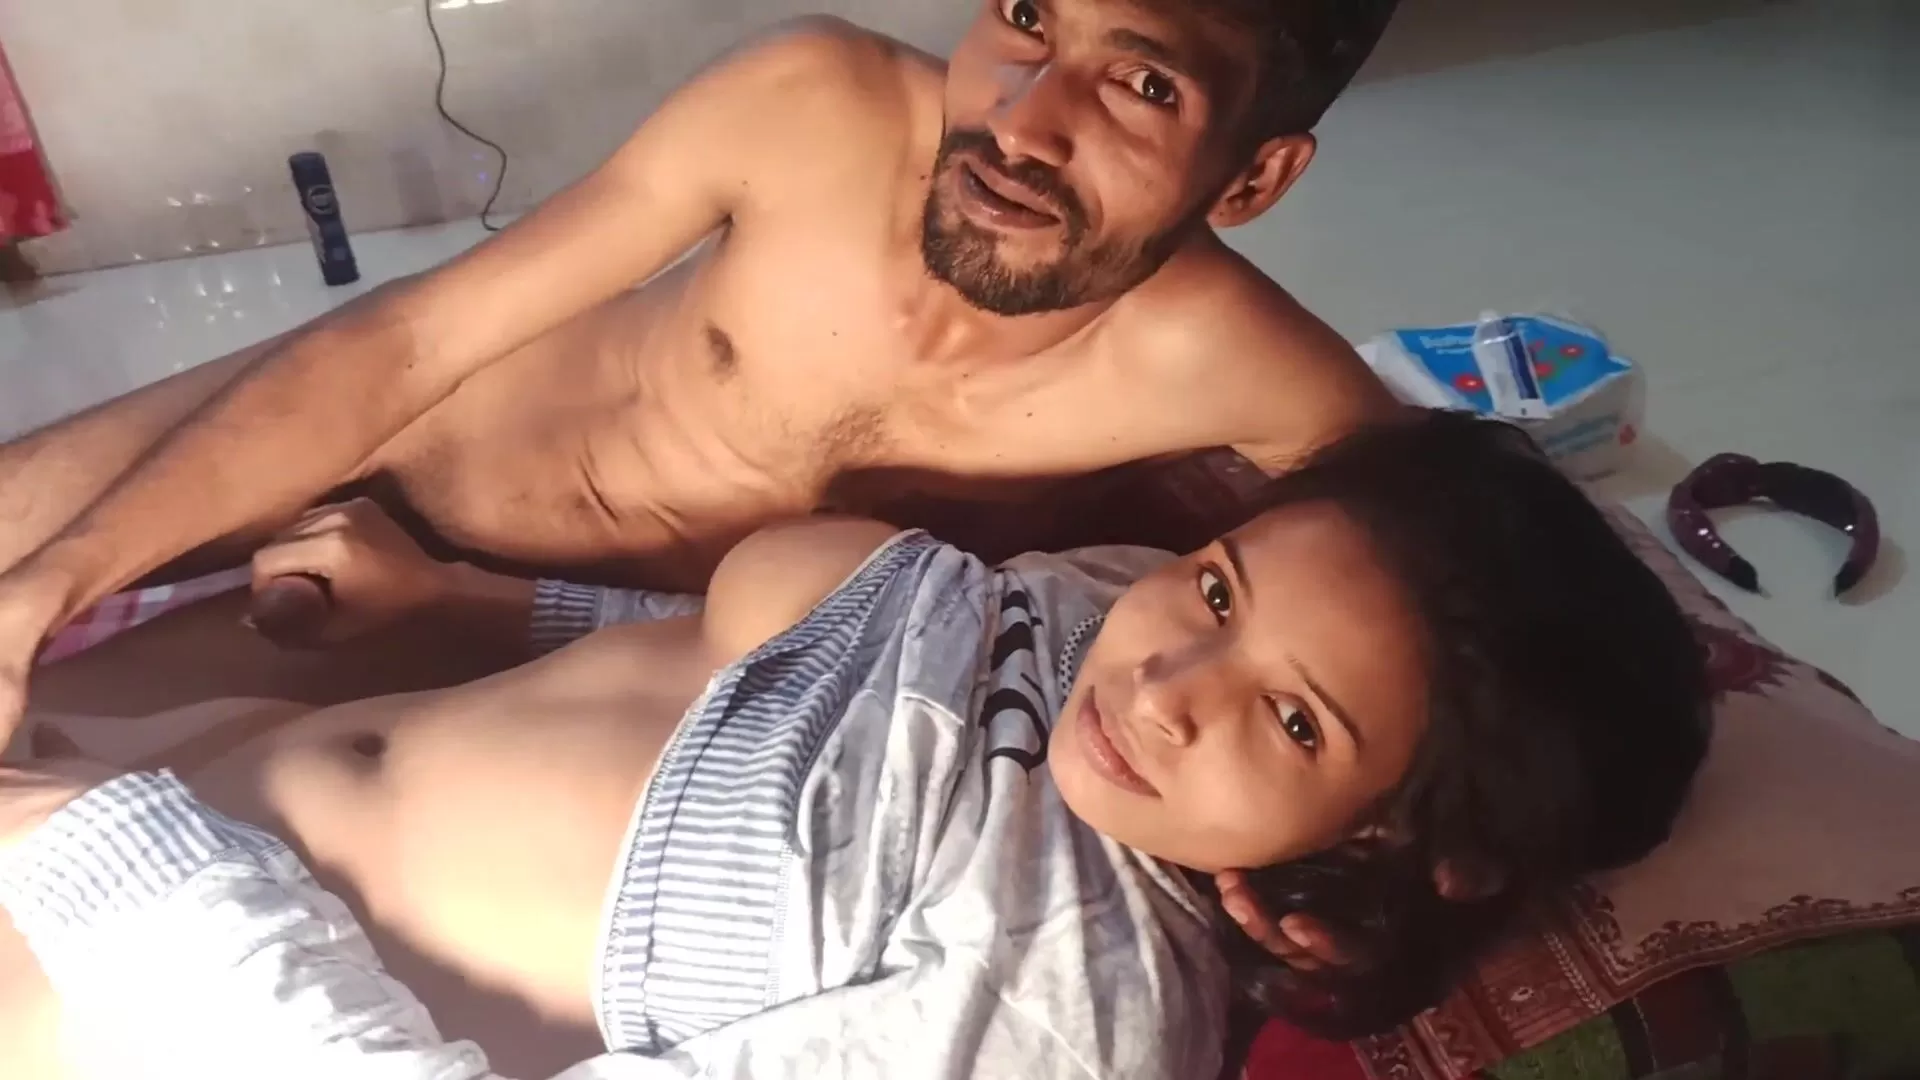 Swinger Couple Brings In Hot Inexperienced Cock To Play Bengali sex watch online